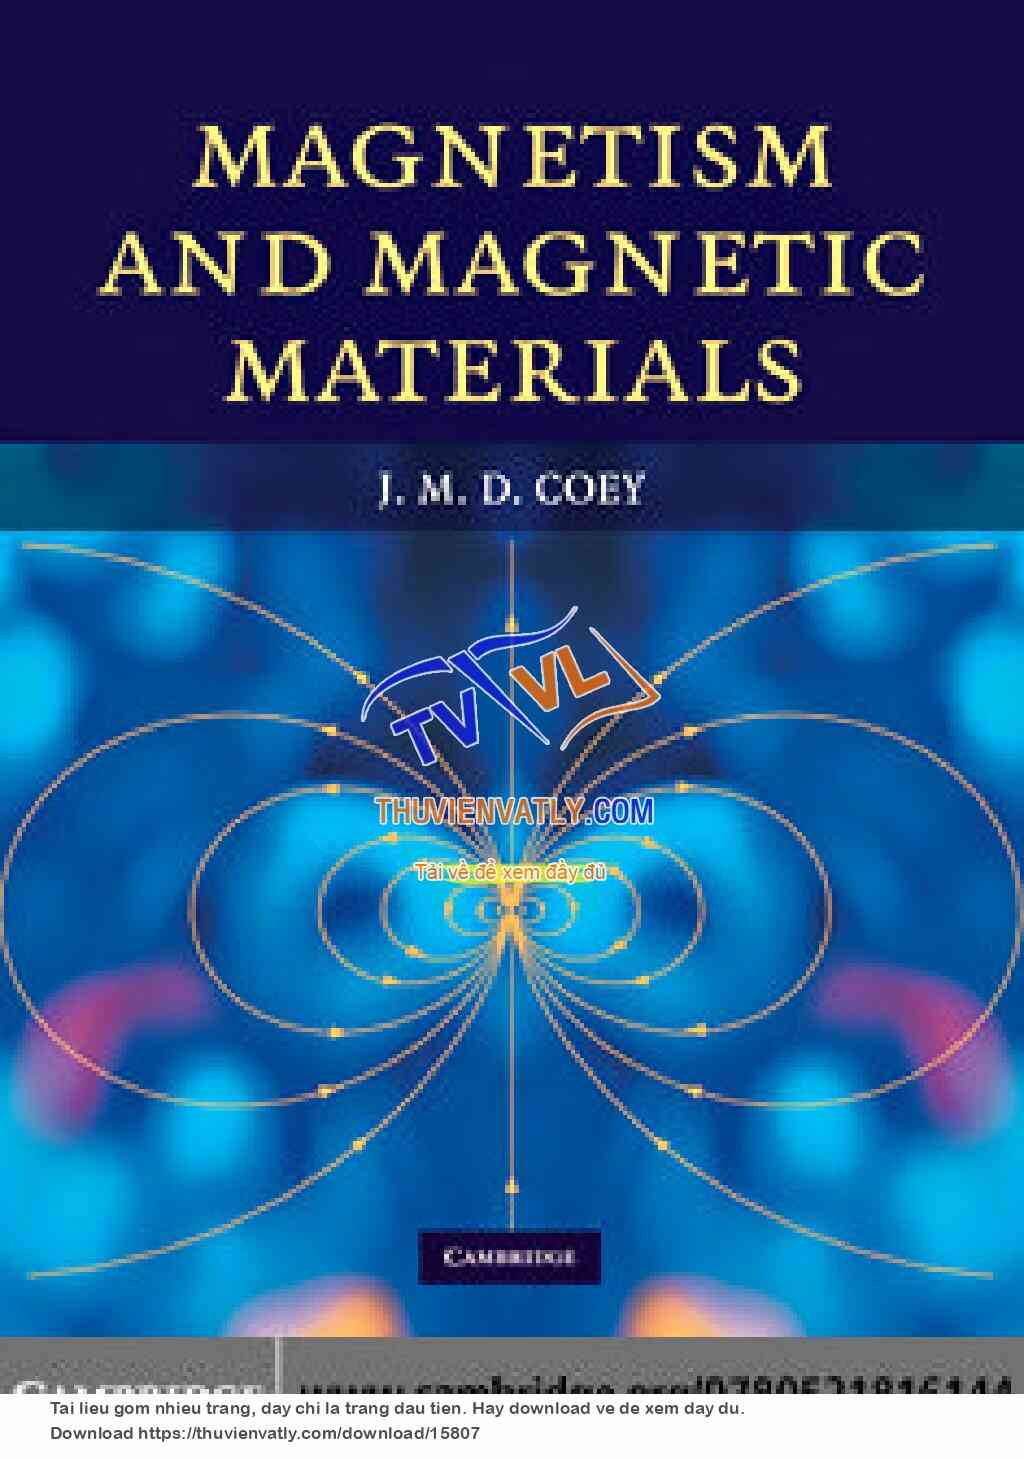 Magnetism and Magnetic Materials (J. Coey, Cambridge University Press, 2009)